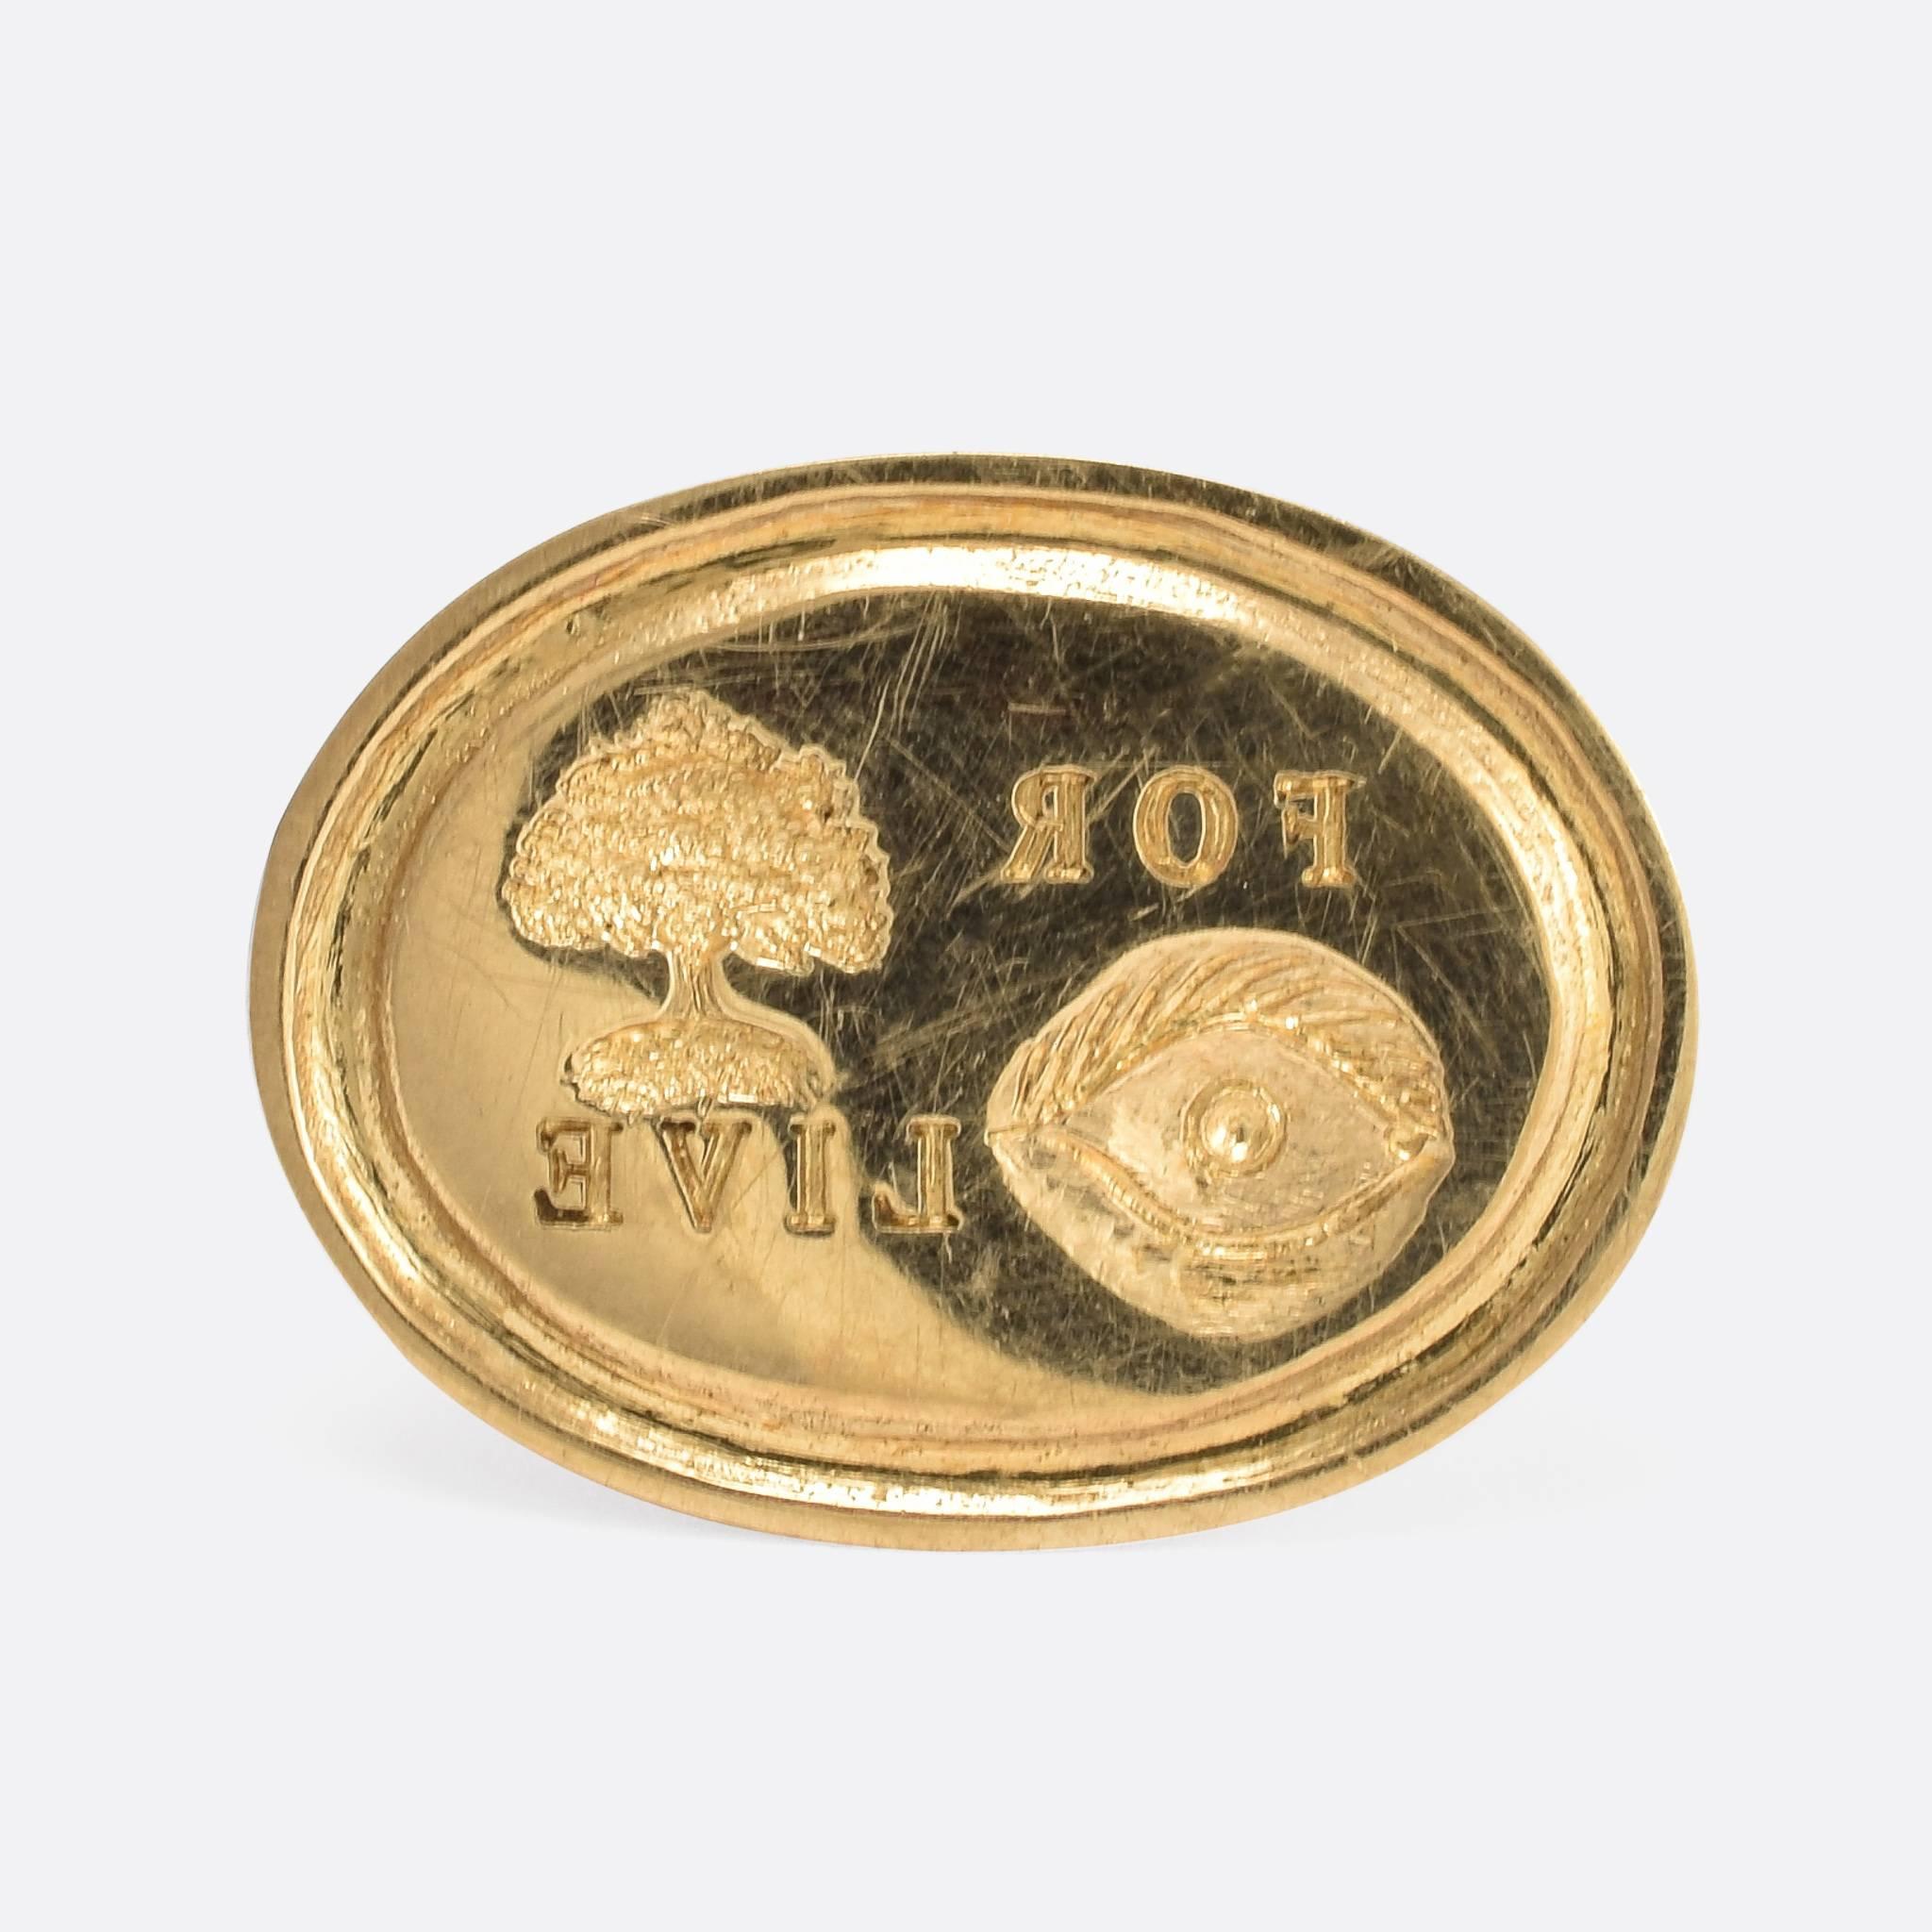 This gold signet ring features a hand carved intaglio rebus puzzle. Popular in the Georgian era, the rebus puzzle uses pictures, symbols or letters to phonetically 